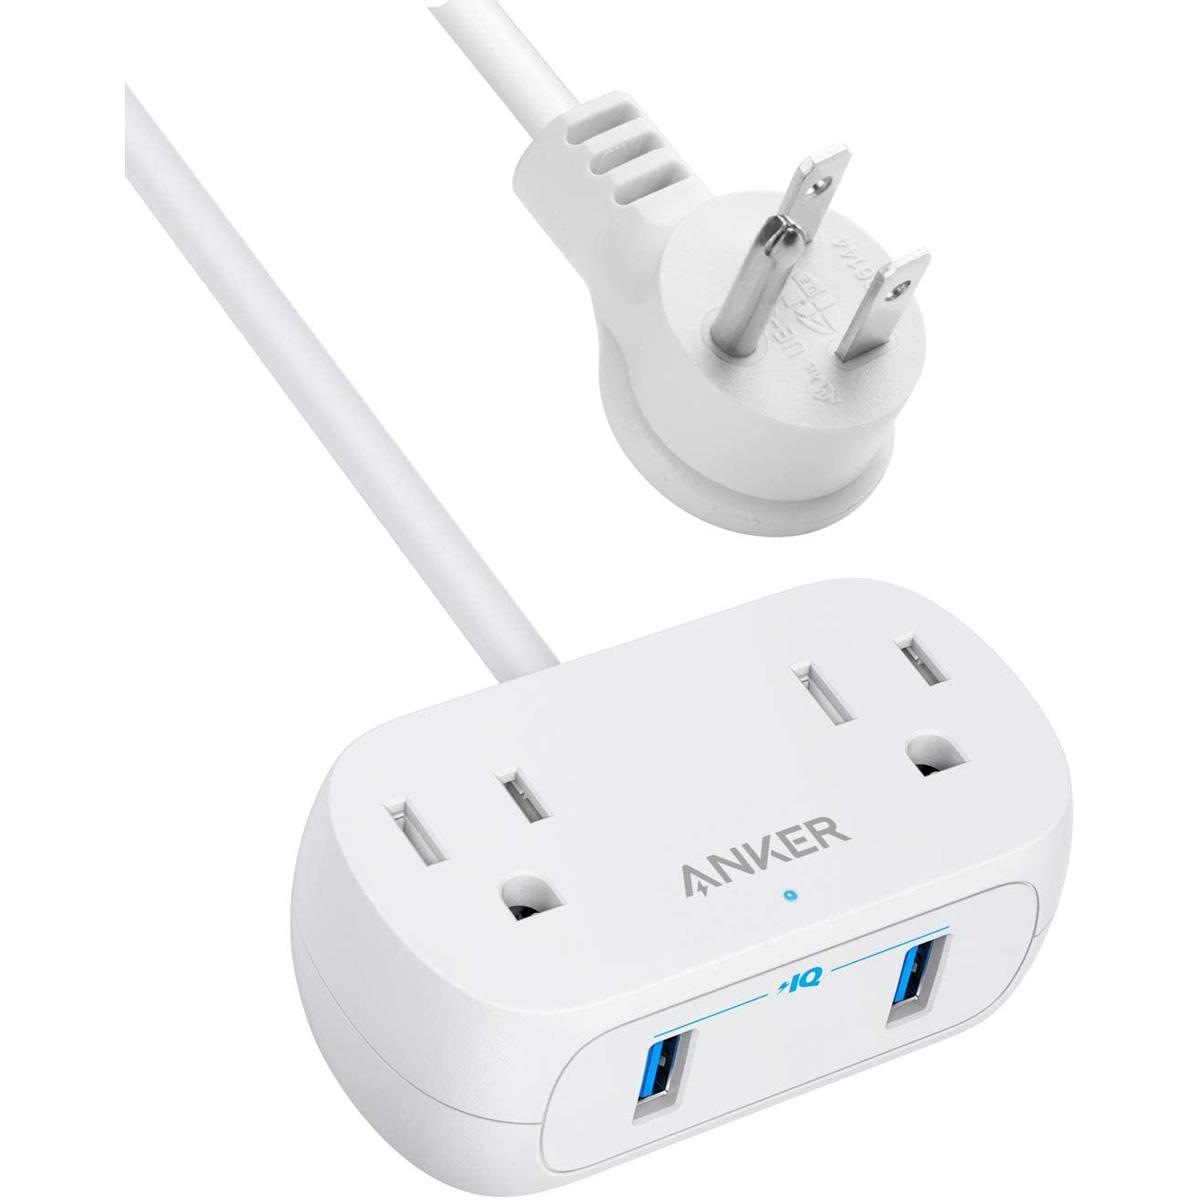 Anker Power Strip with USB PowerExtend USB 2 Outlets for $10.10